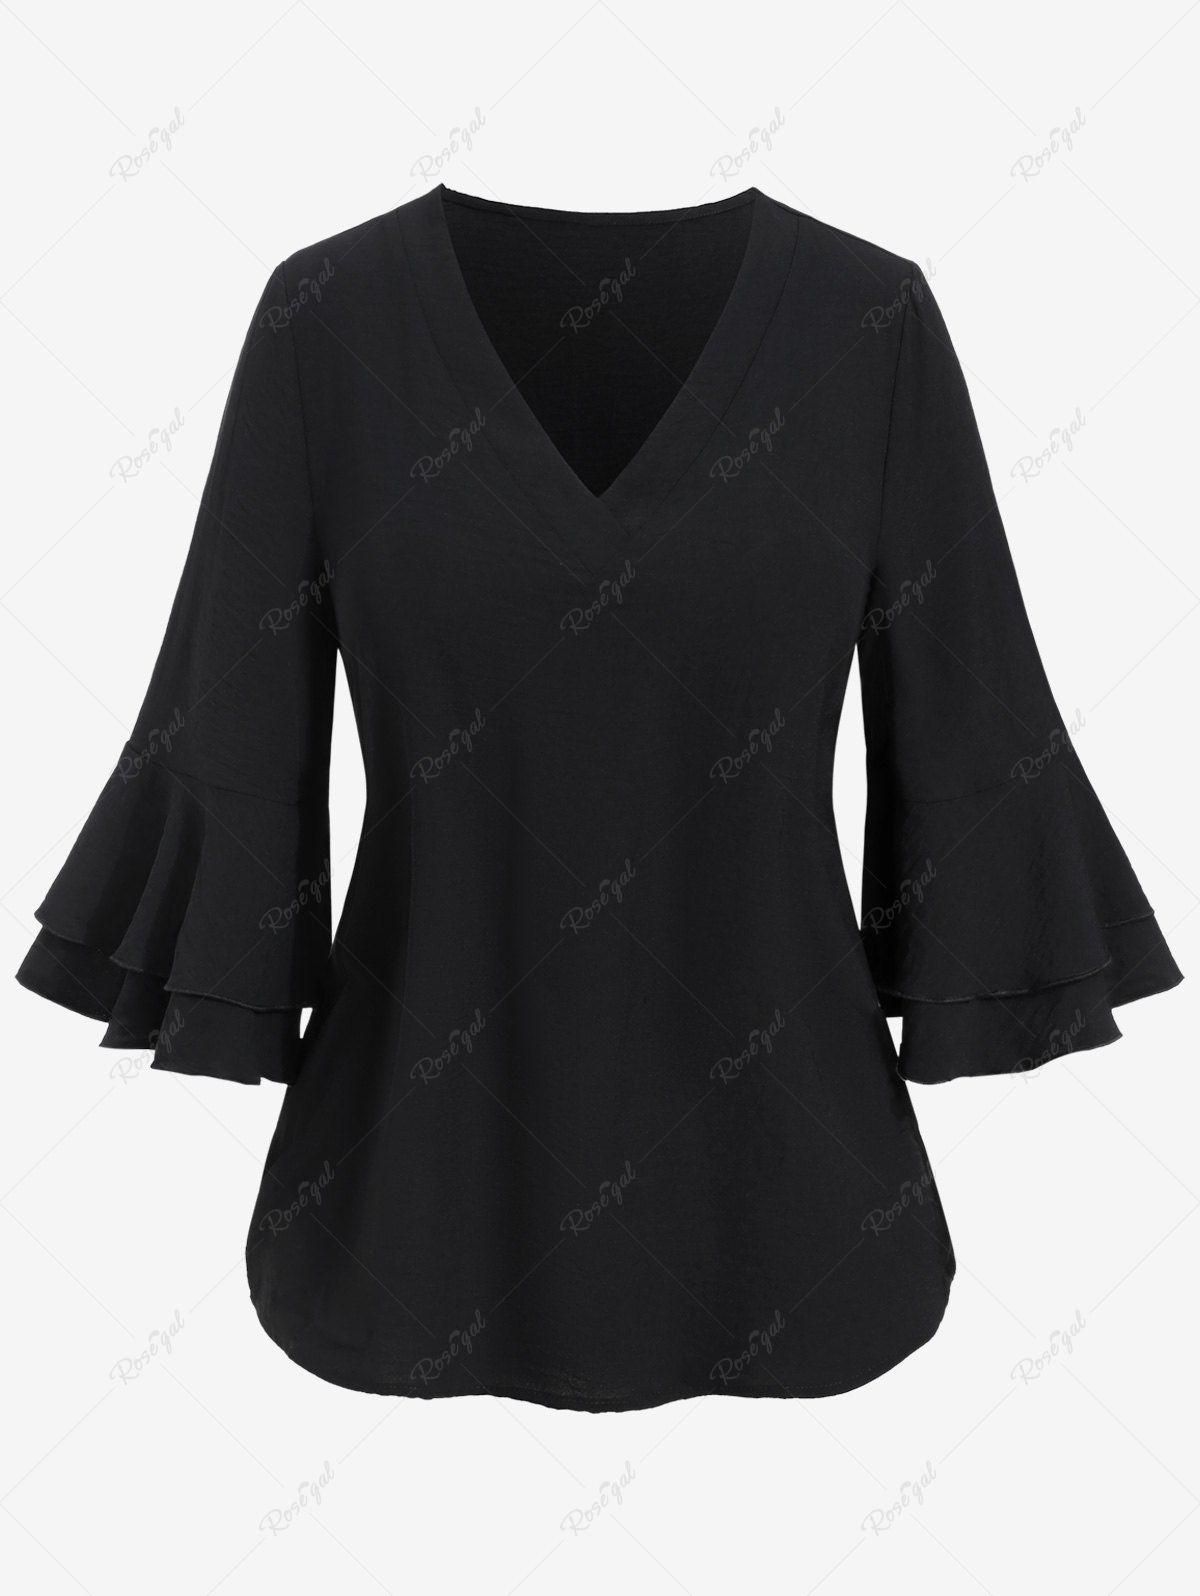 Plus Size Layered Bell Sleeves T-shirt - L